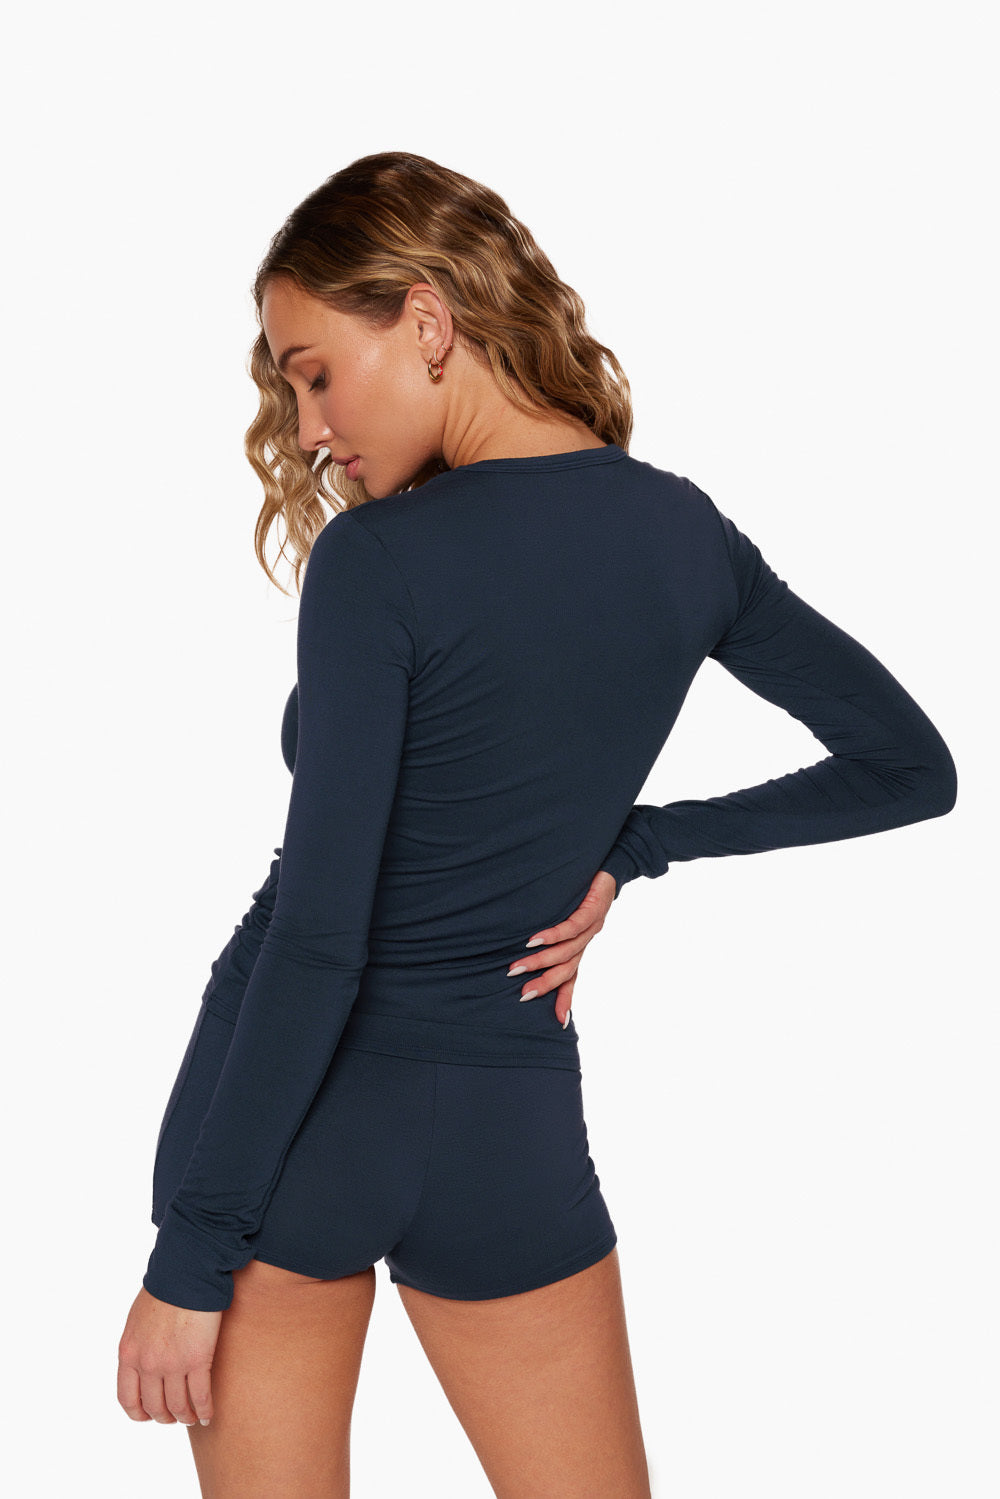 SLEEP JERSEY FITTED LONG SLEEVE - OXFORD